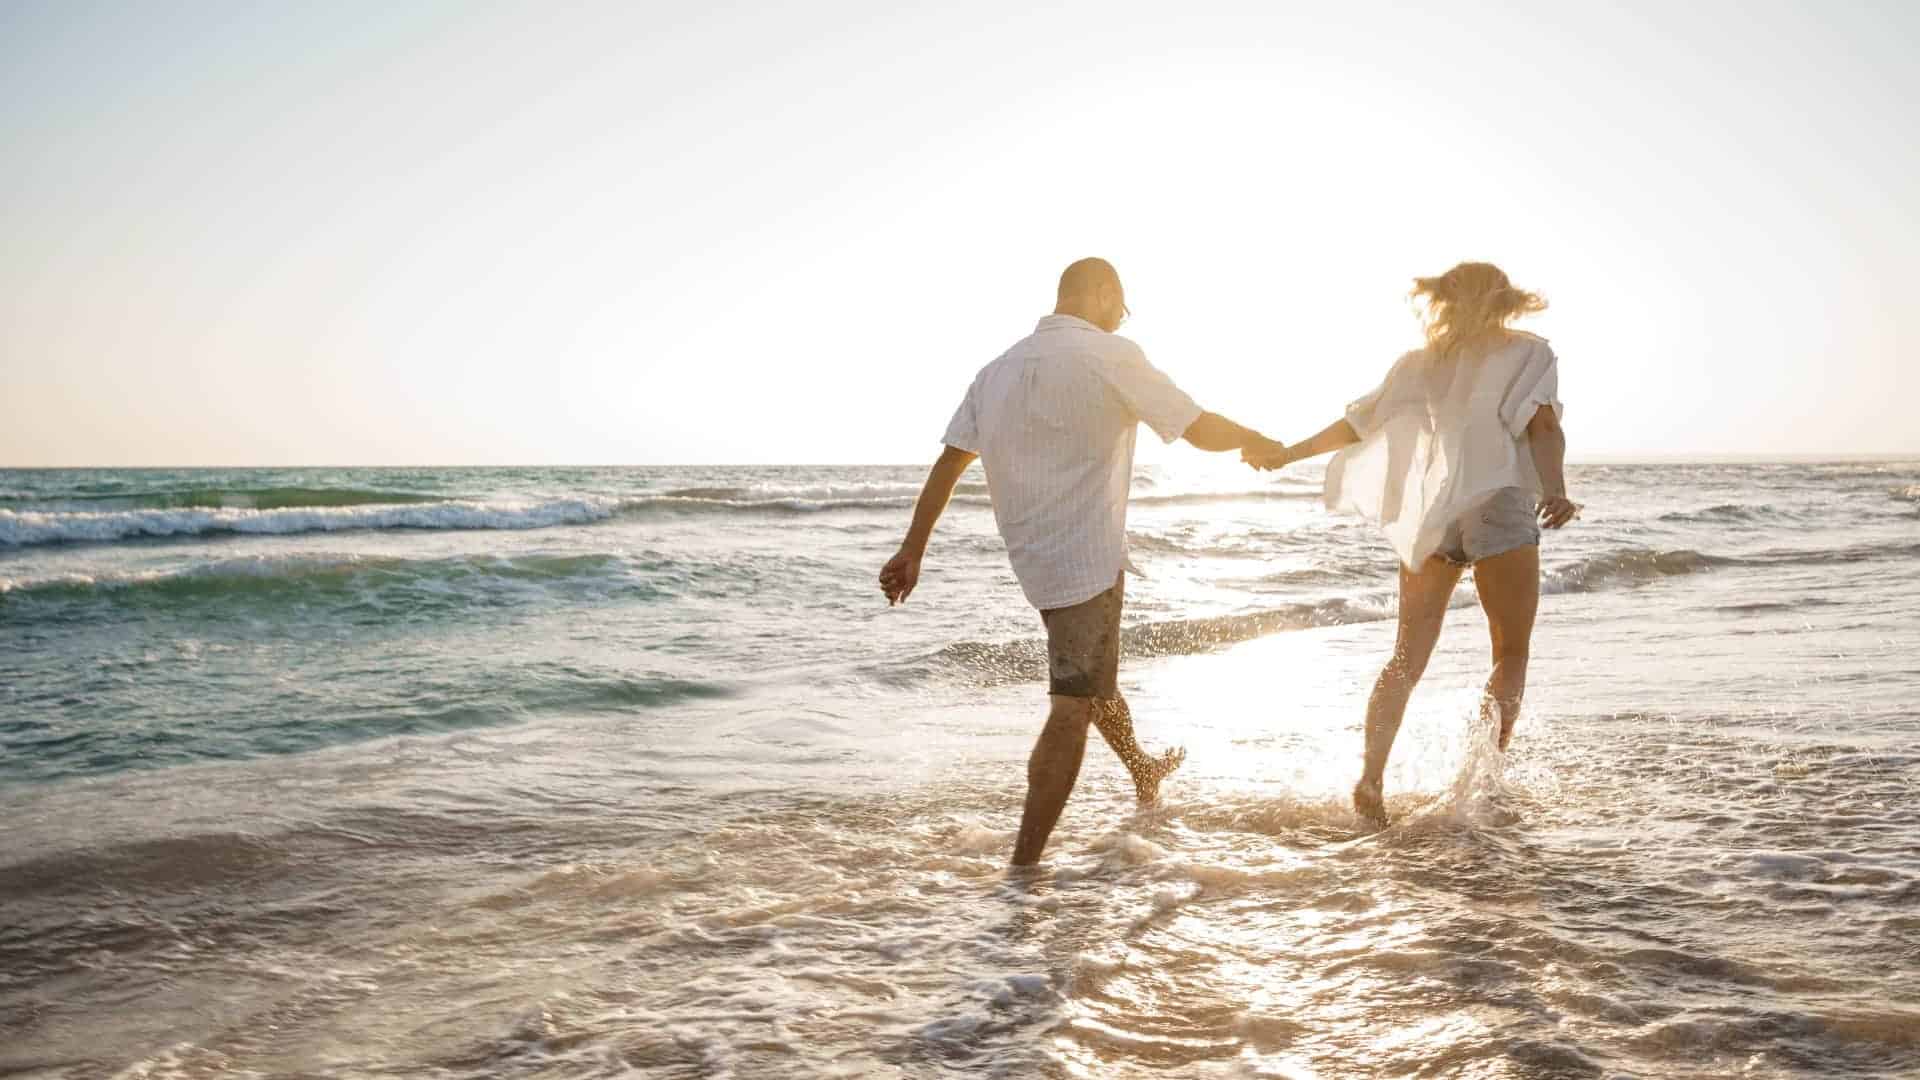 A man and woman are holding hands while walking on the beach.